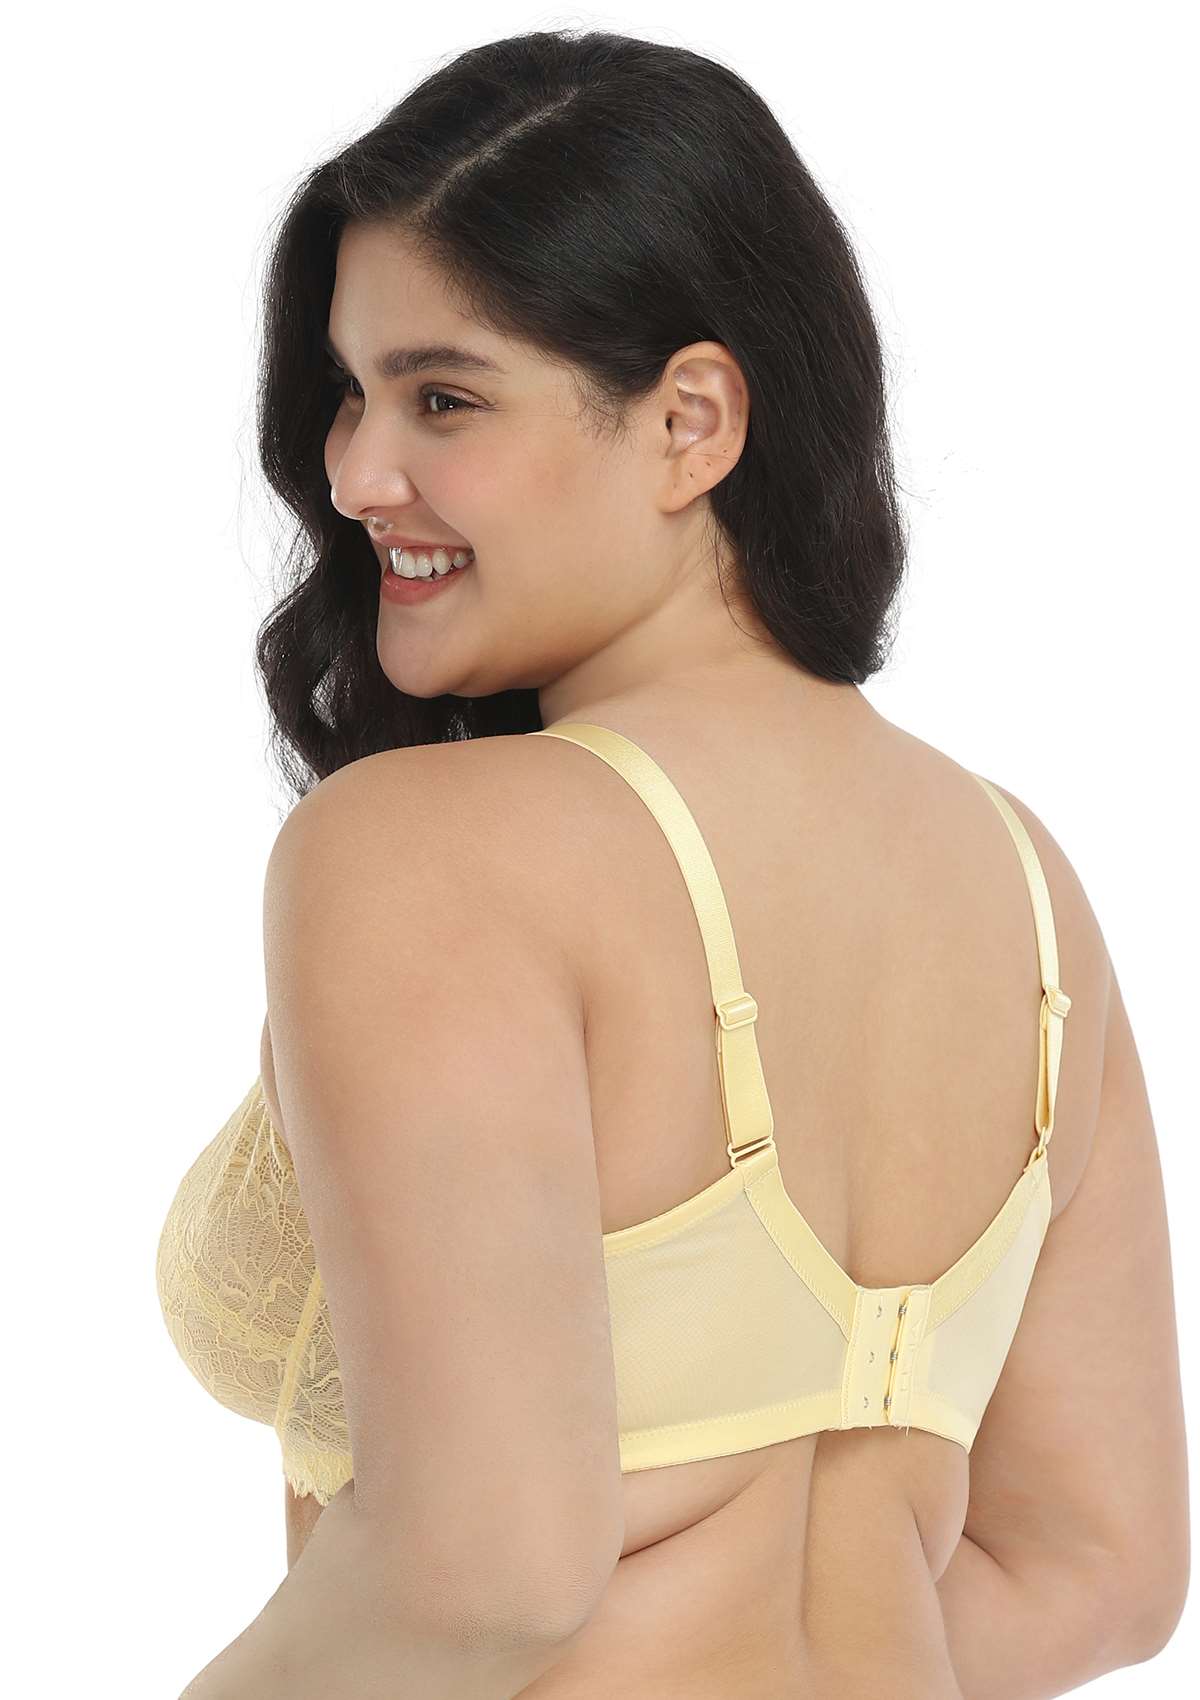 HSIA Blossom Full Coverage Side Support Bra: Designed For Heavy Busts - Light Yellow / 34 / DD/E